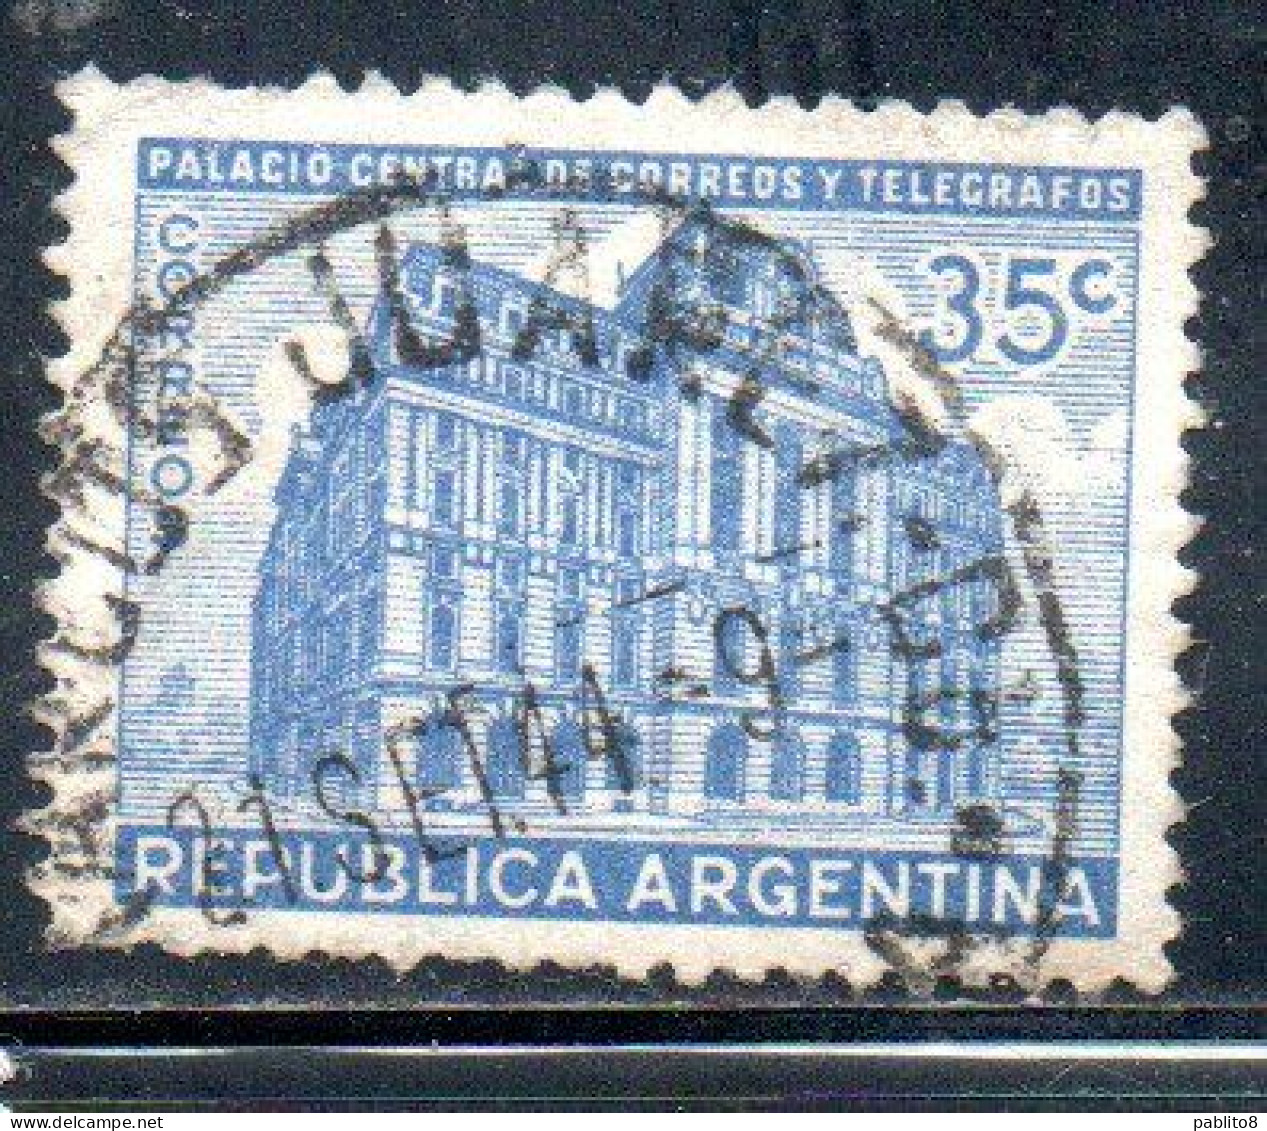 ARGENTINA 1942 POST OFFICE BUENOS AIRES 35c  USED USADO OBLITERE' - Usados